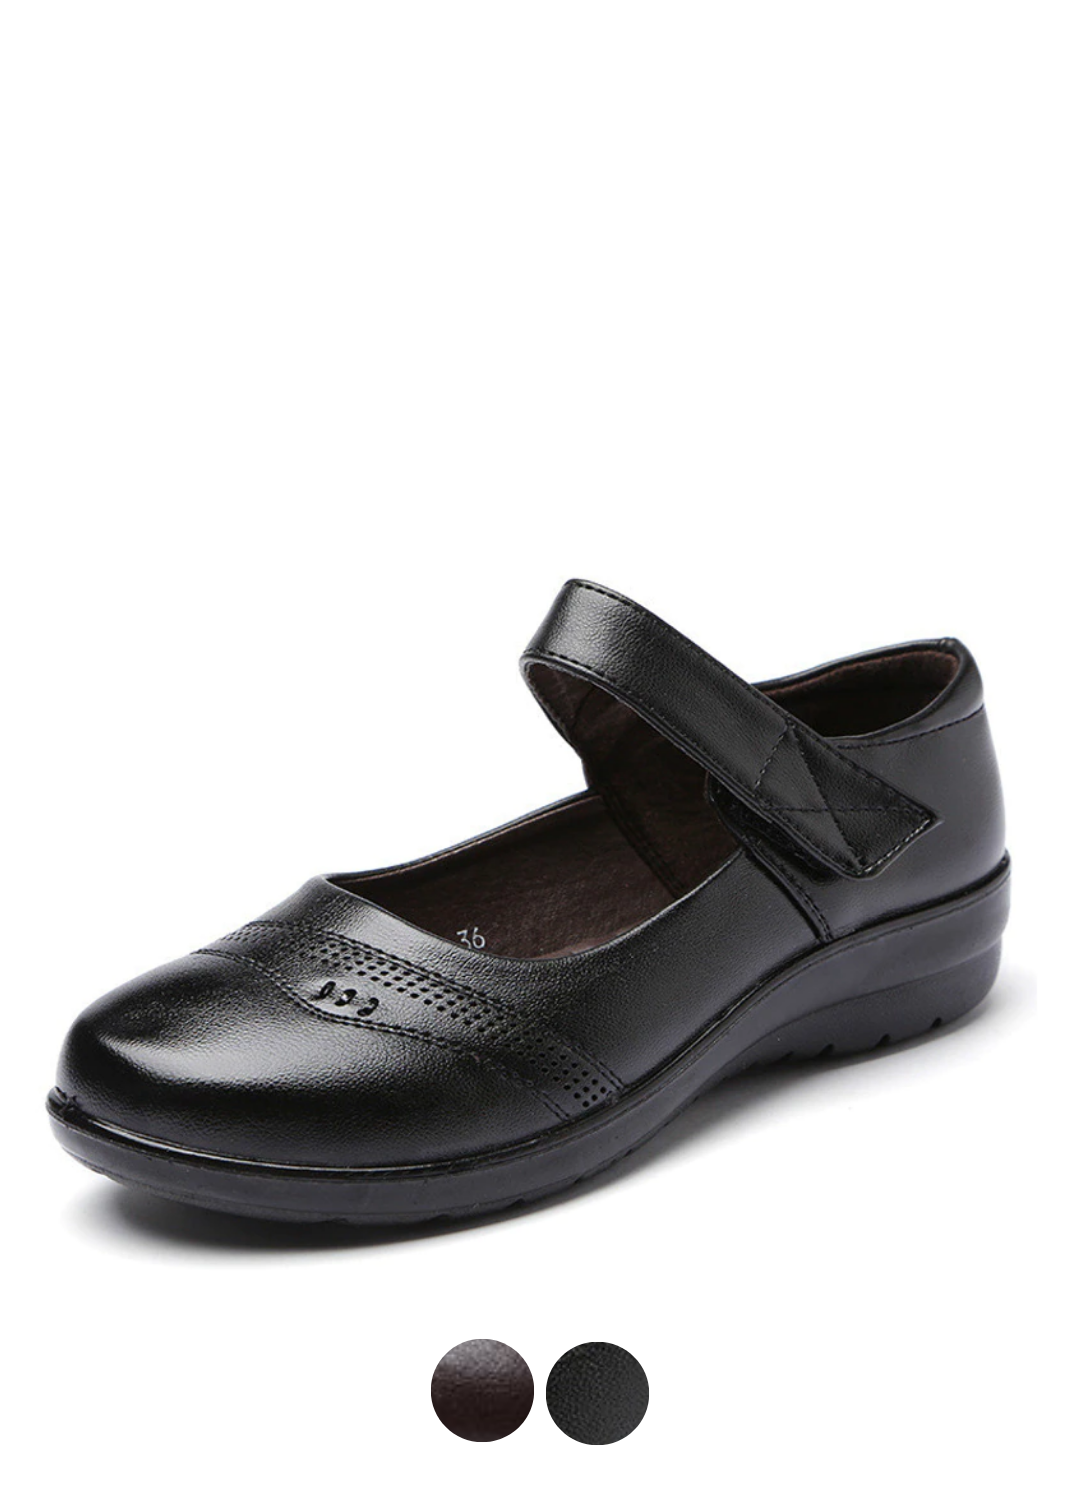 USS Shoes Diana Women's Loafer Shoes | ussshoes.com – USS® Shoes